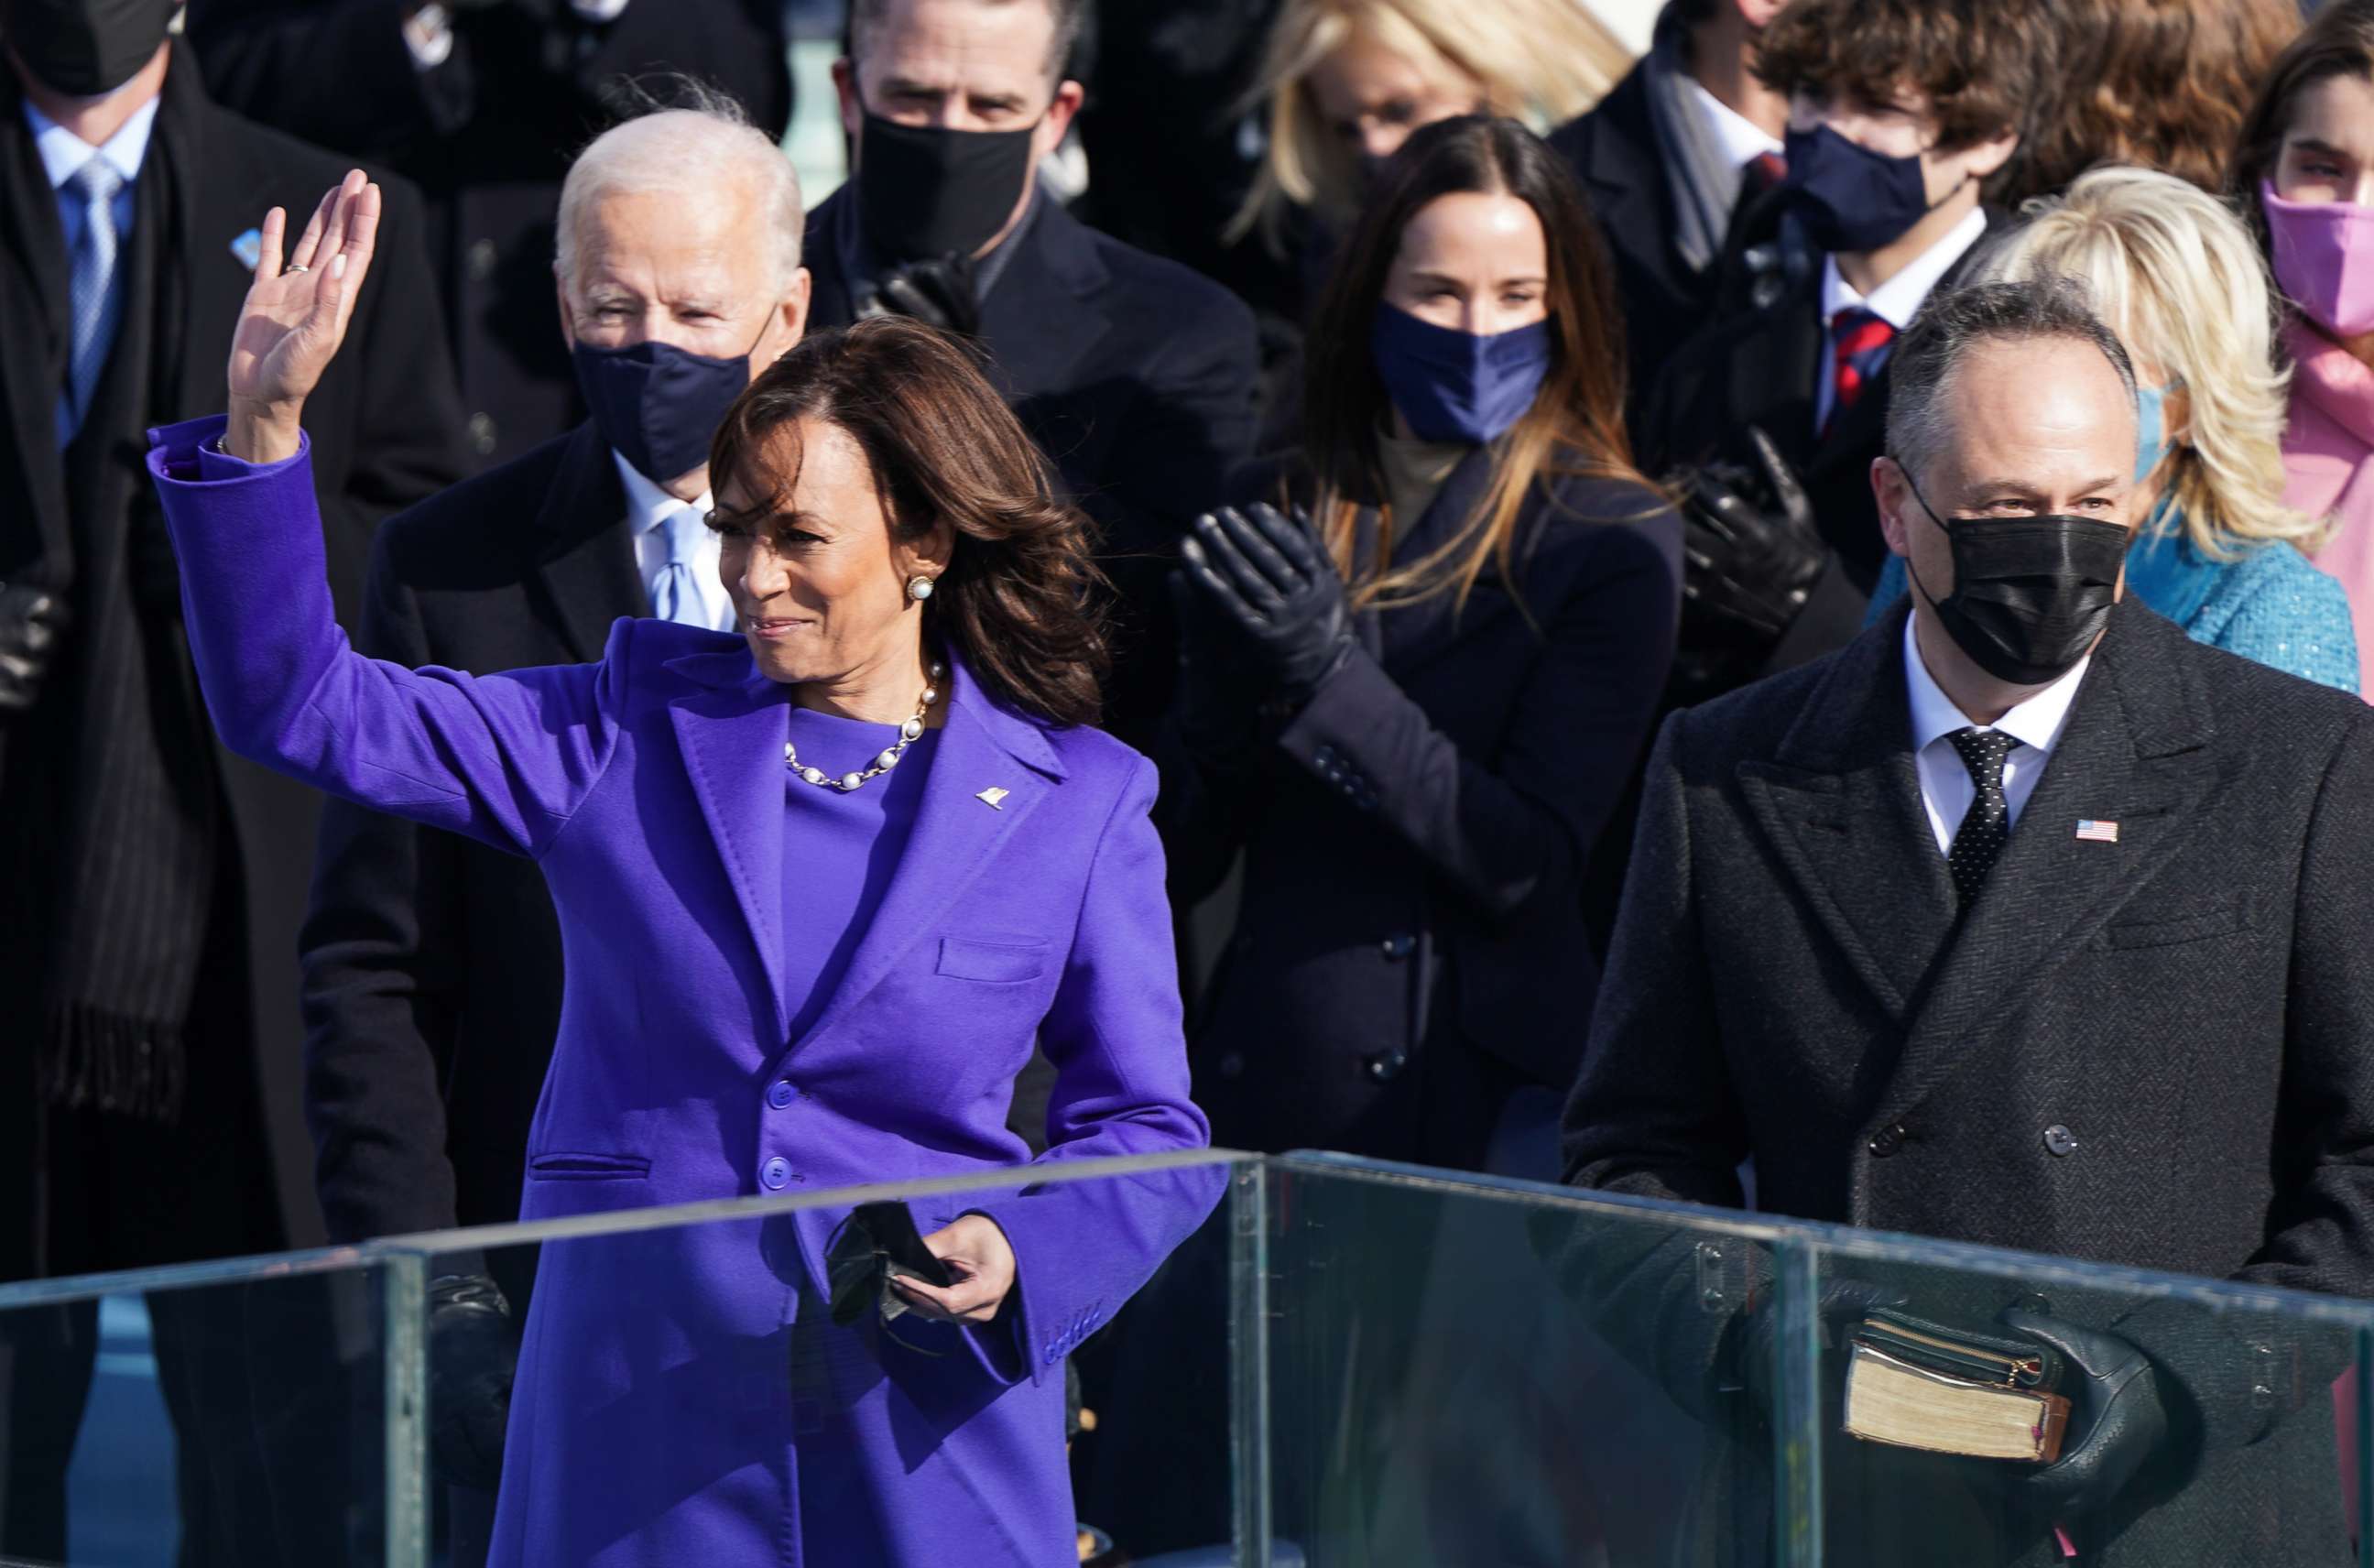 PHOTO: Kamala Harris waves after she was sworn in as Vice President during the inauguration of Joe Biden as the 46th President of the United States on the West Front of the Capitol, Jan. 20, 2021. 